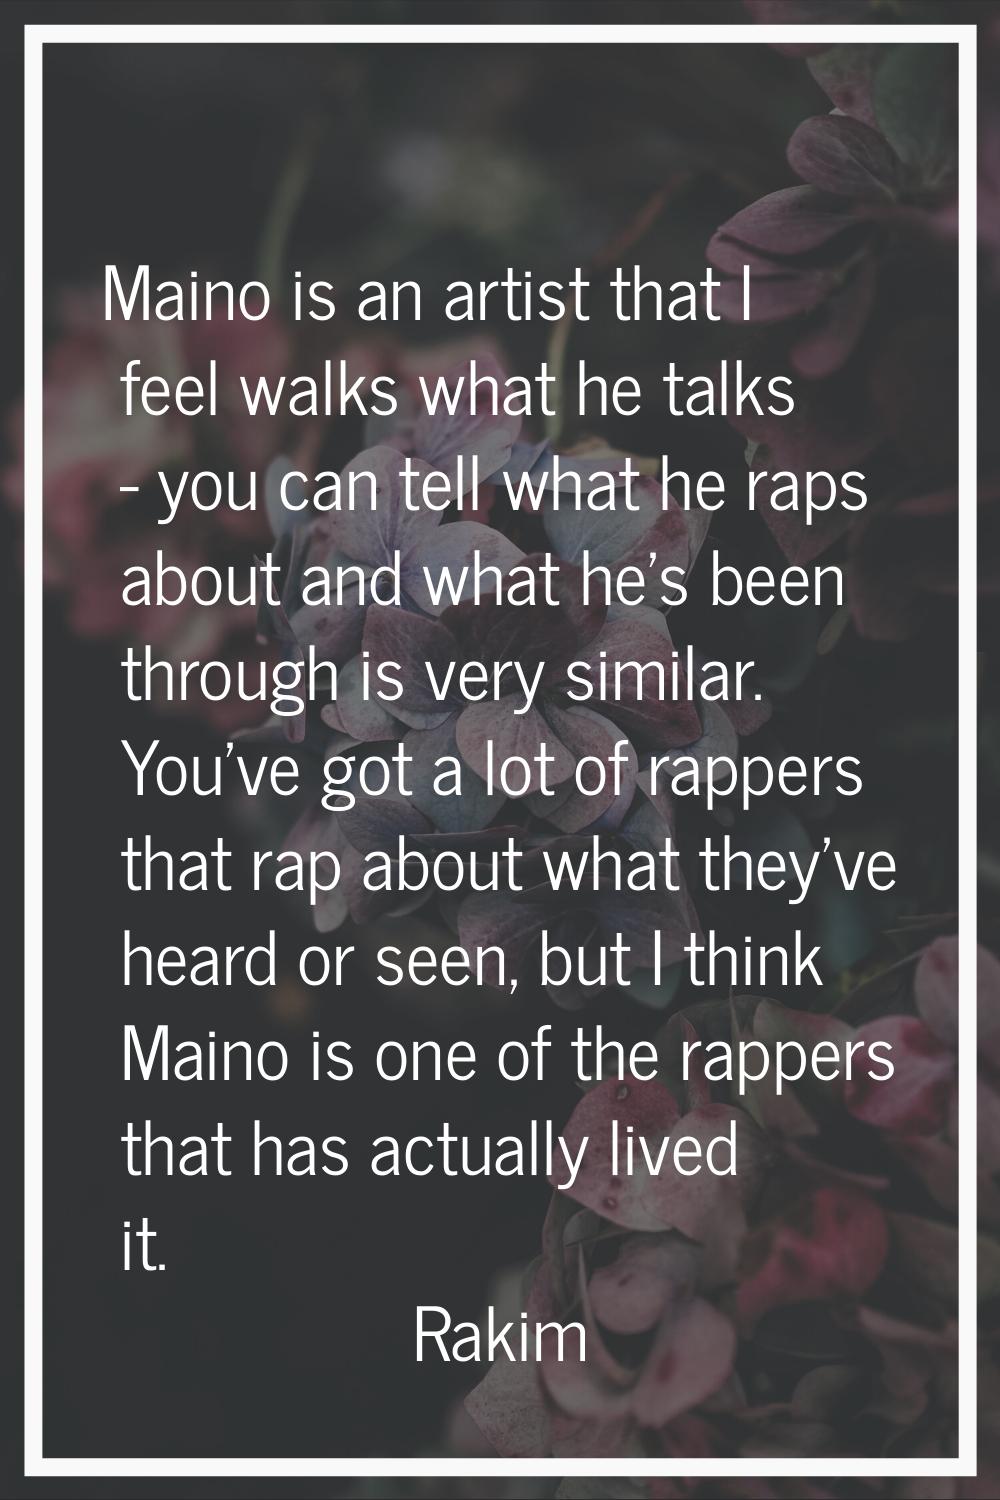 Maino is an artist that I feel walks what he talks - you can tell what he raps about and what he's 